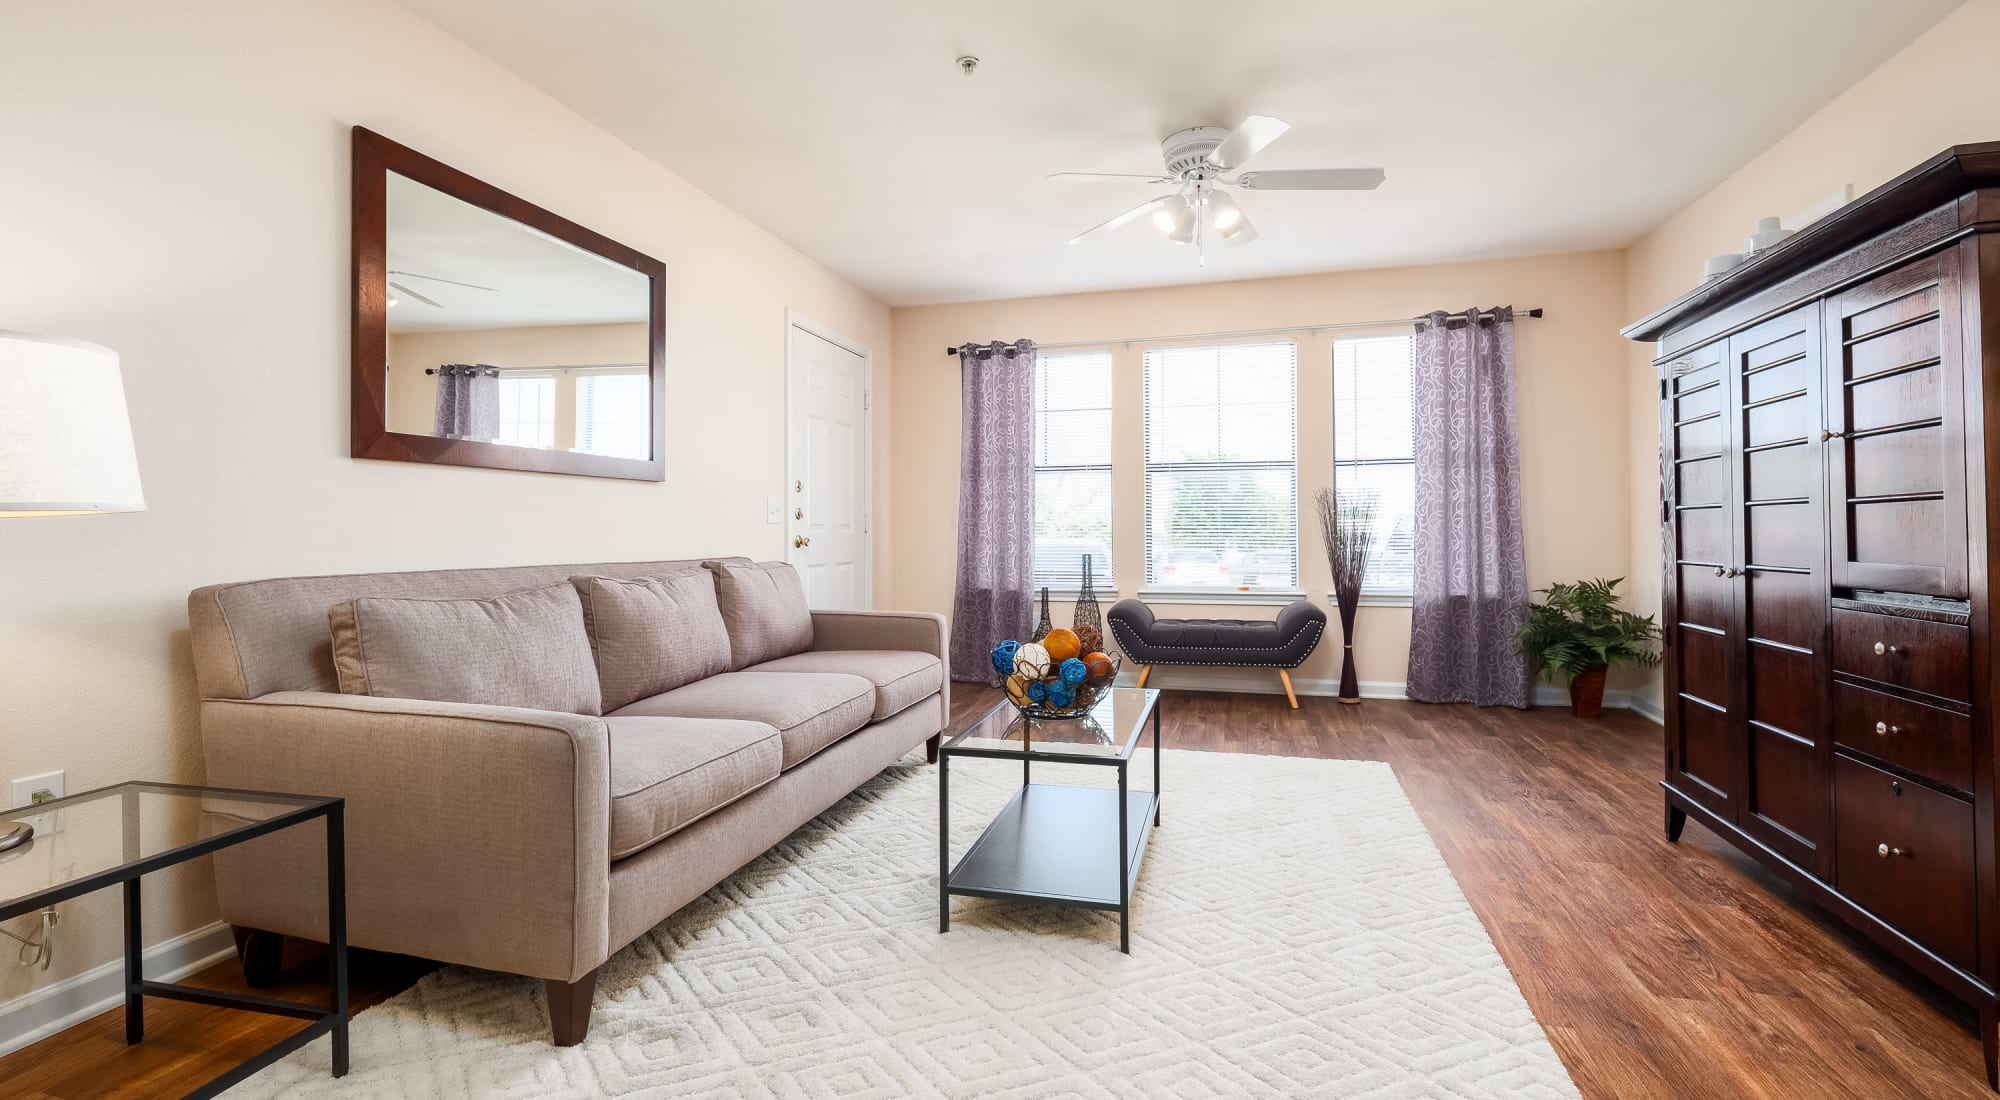 Apply to live at Arbrook Park Apartment Homes in Arlington, Texas